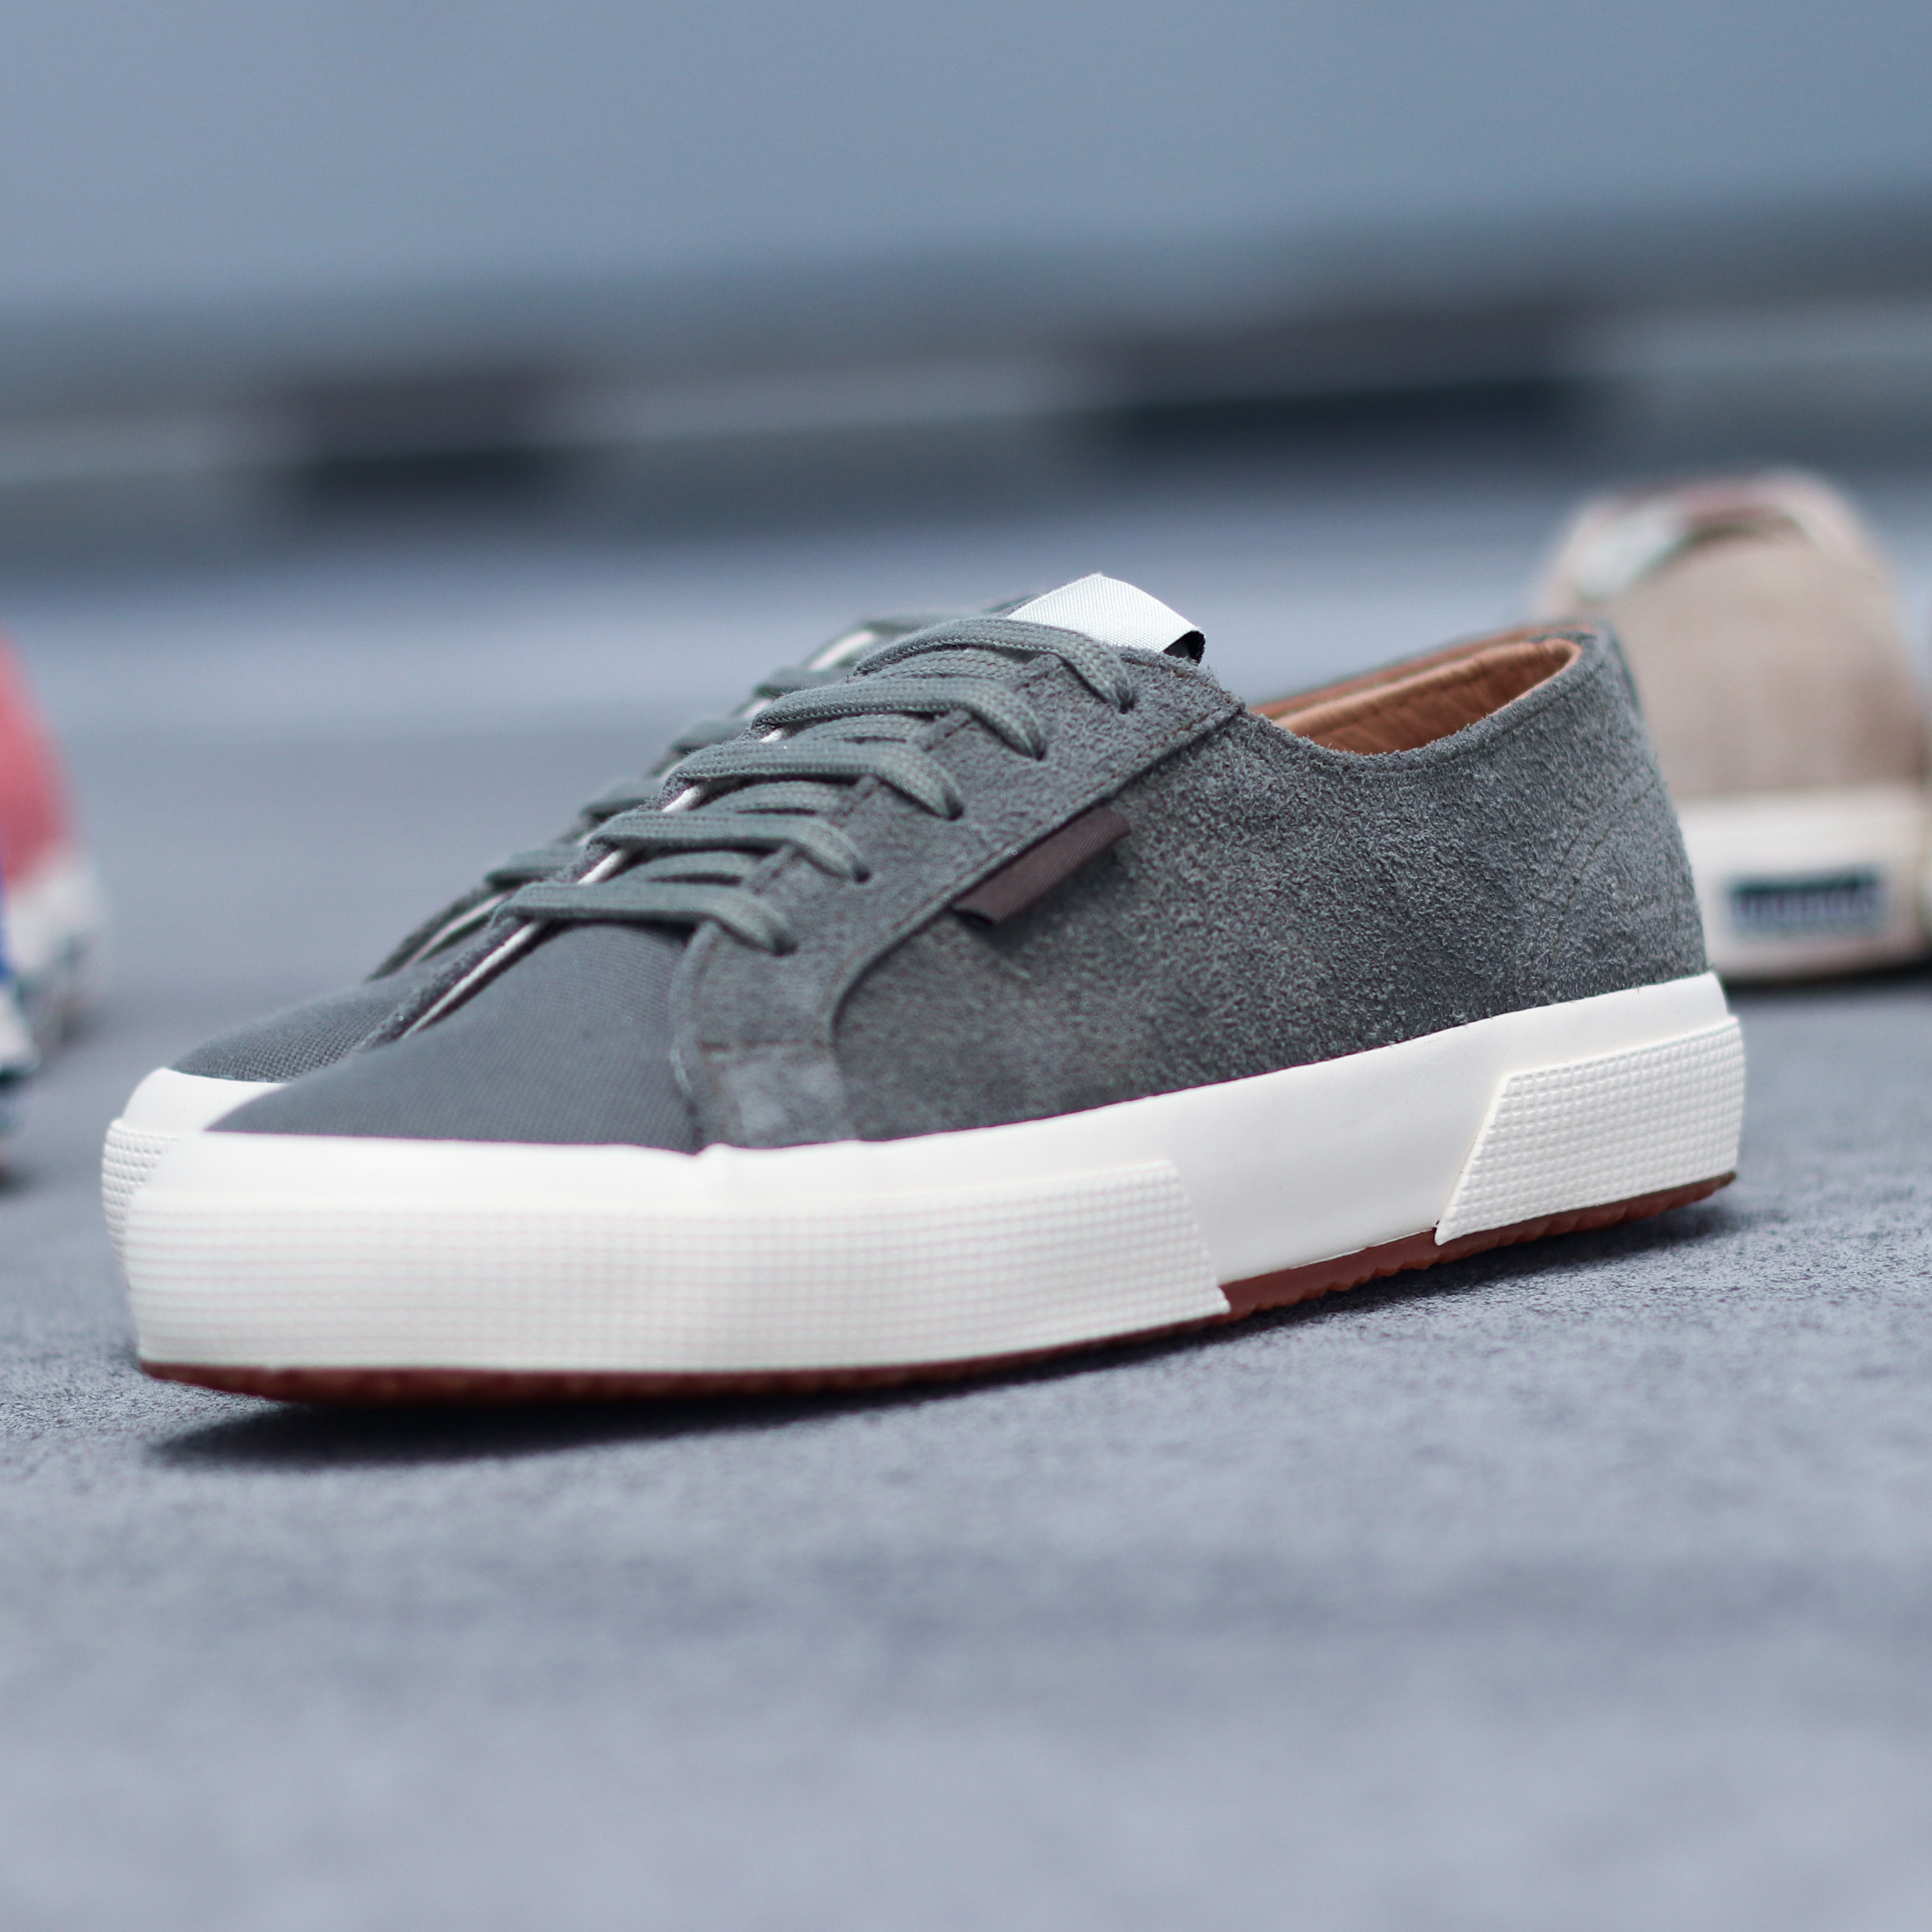 Superga sneakers on sale at Westgate 